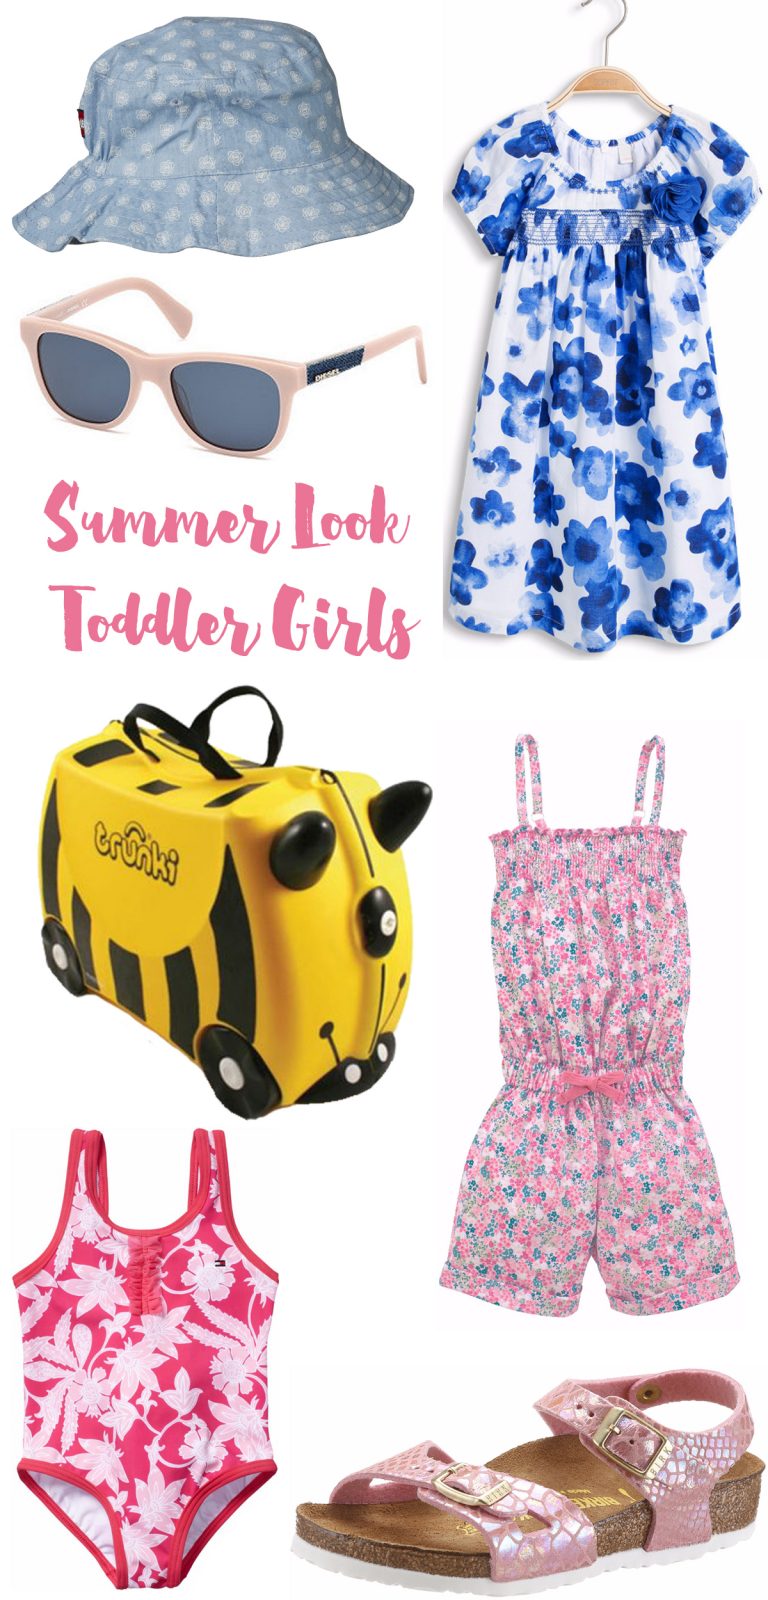 Otto Sommer Outfits Summer Look Toddler Girls